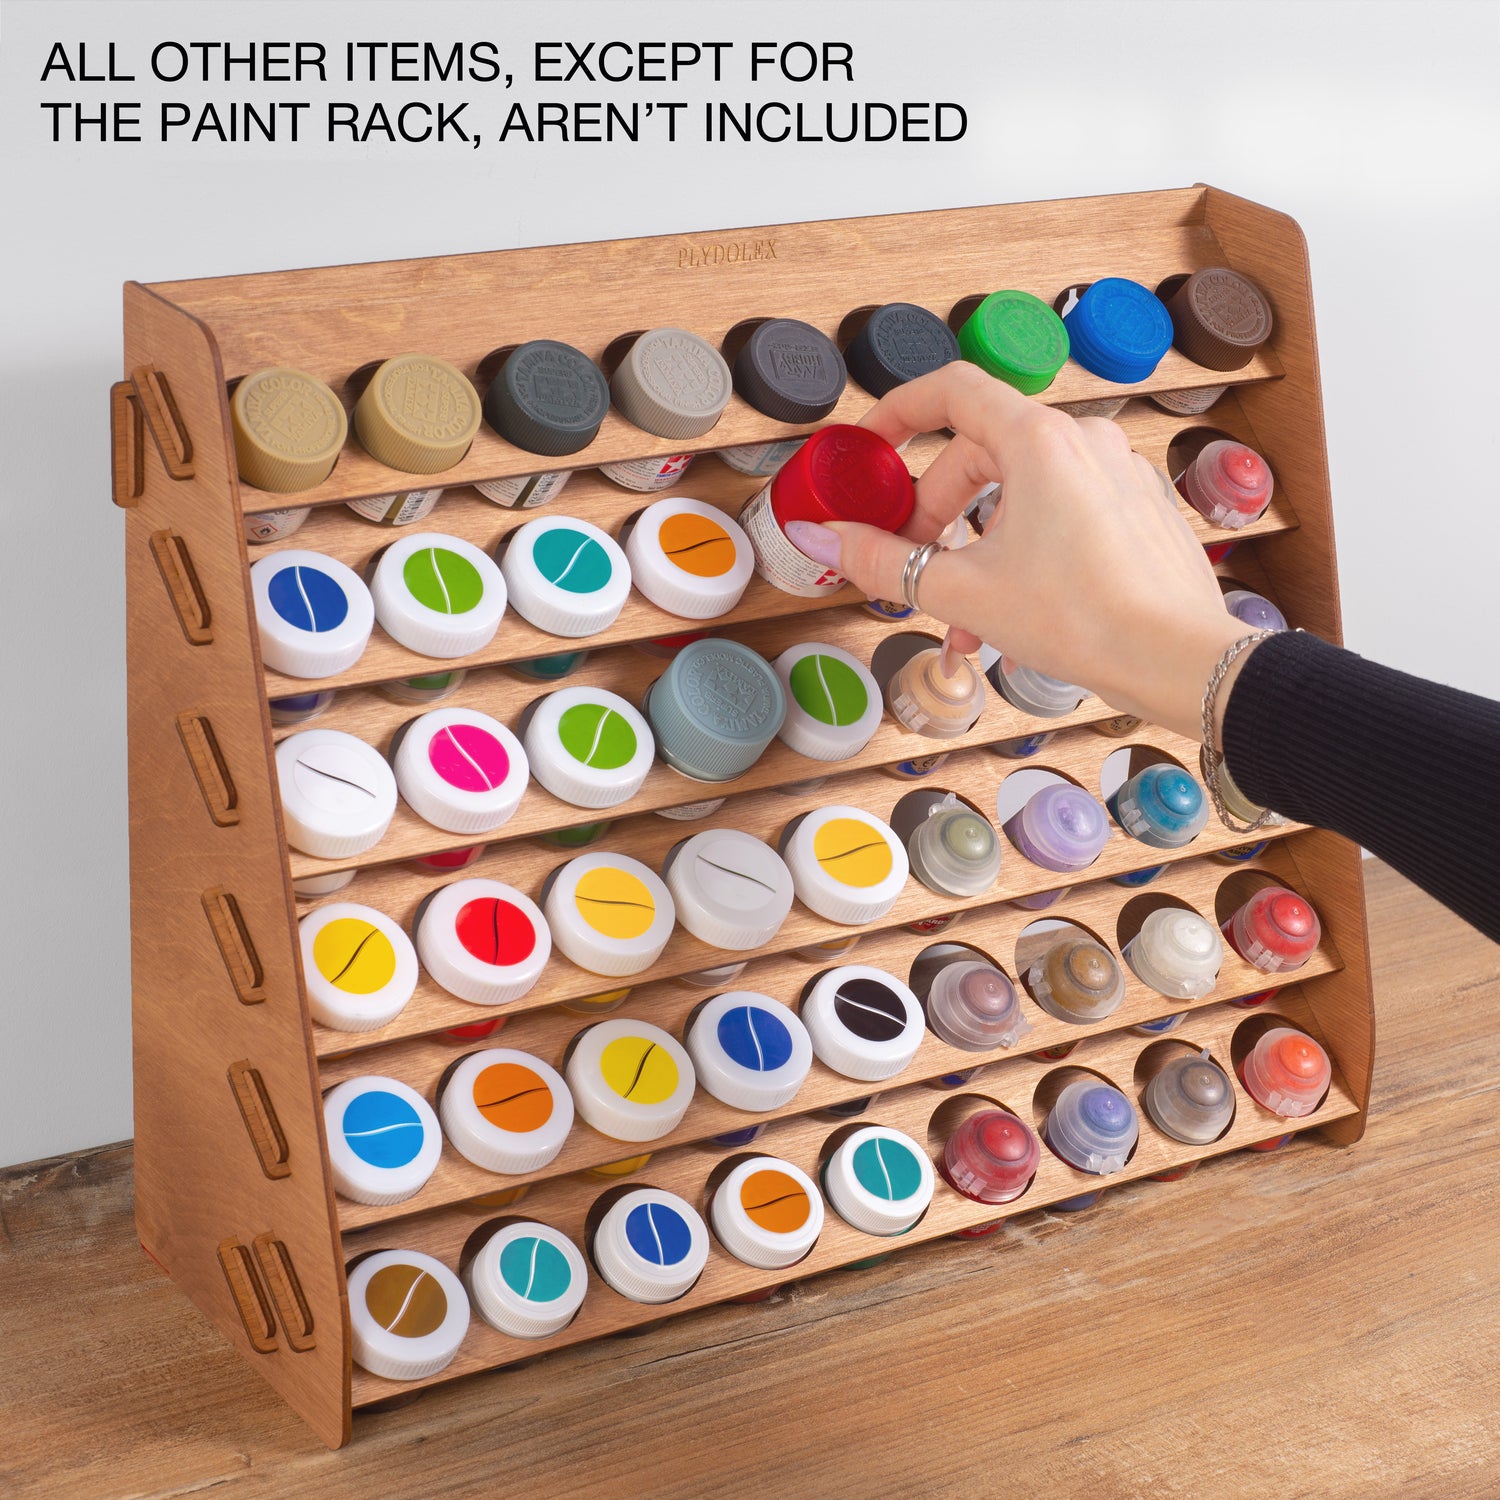 Plydolex Tamiya Paint Rack Organizer with 54 Holes for Miniature Paint –  Plywood Organizers for Miniaute Painters - Wooden HandCraft Gift and  Accessories by Plydolex